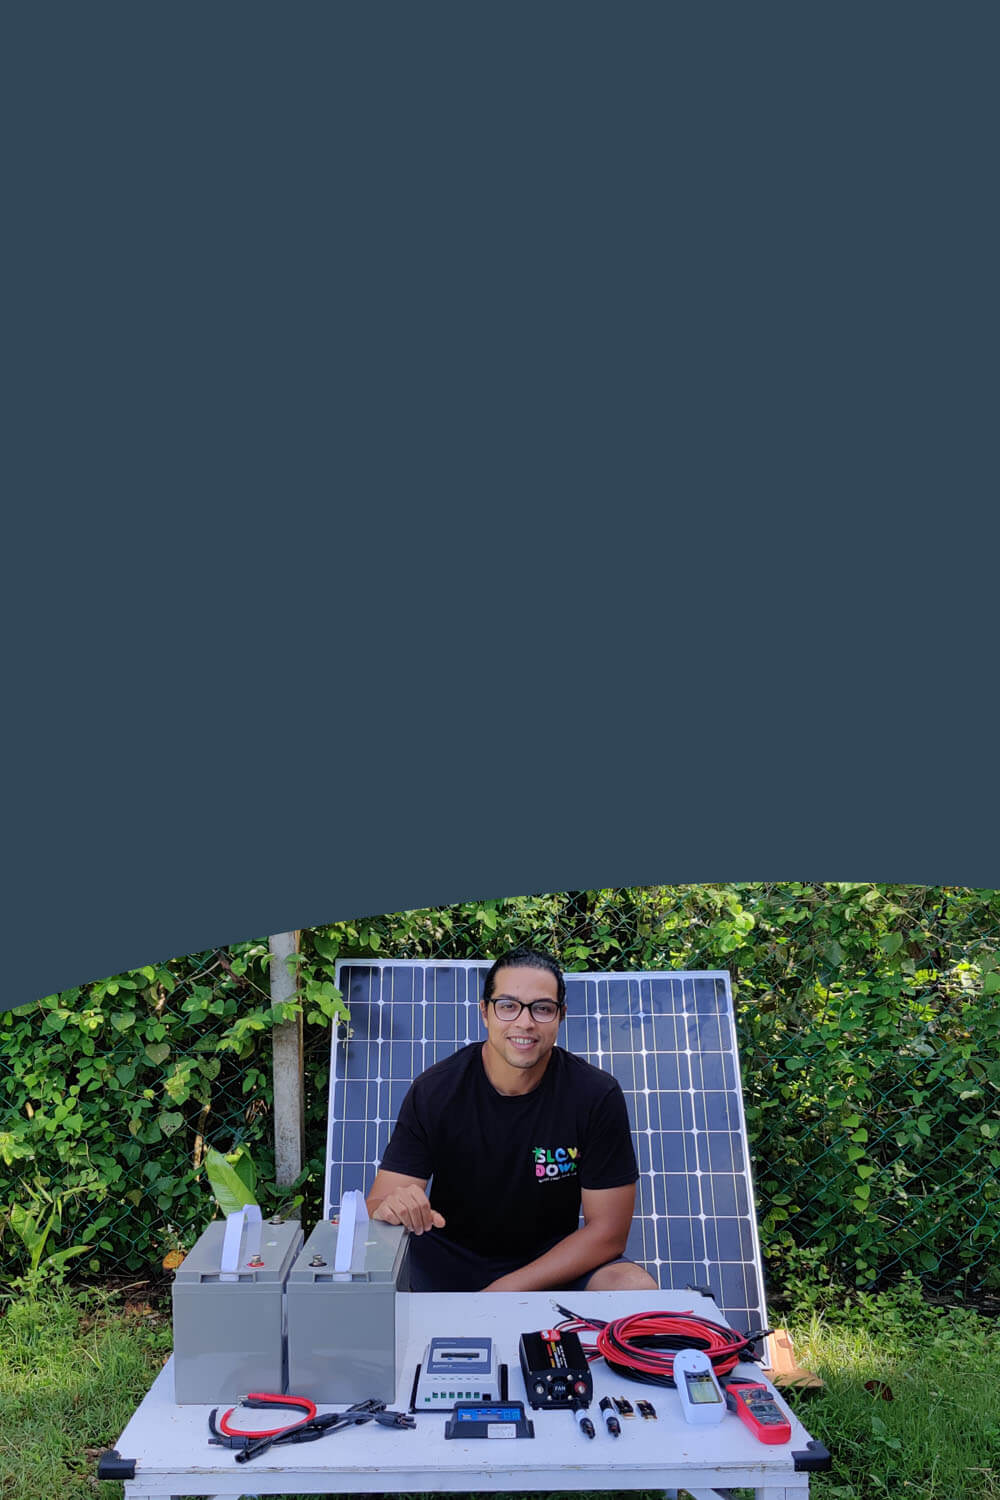 Renewablewise - your guide to DIY solar